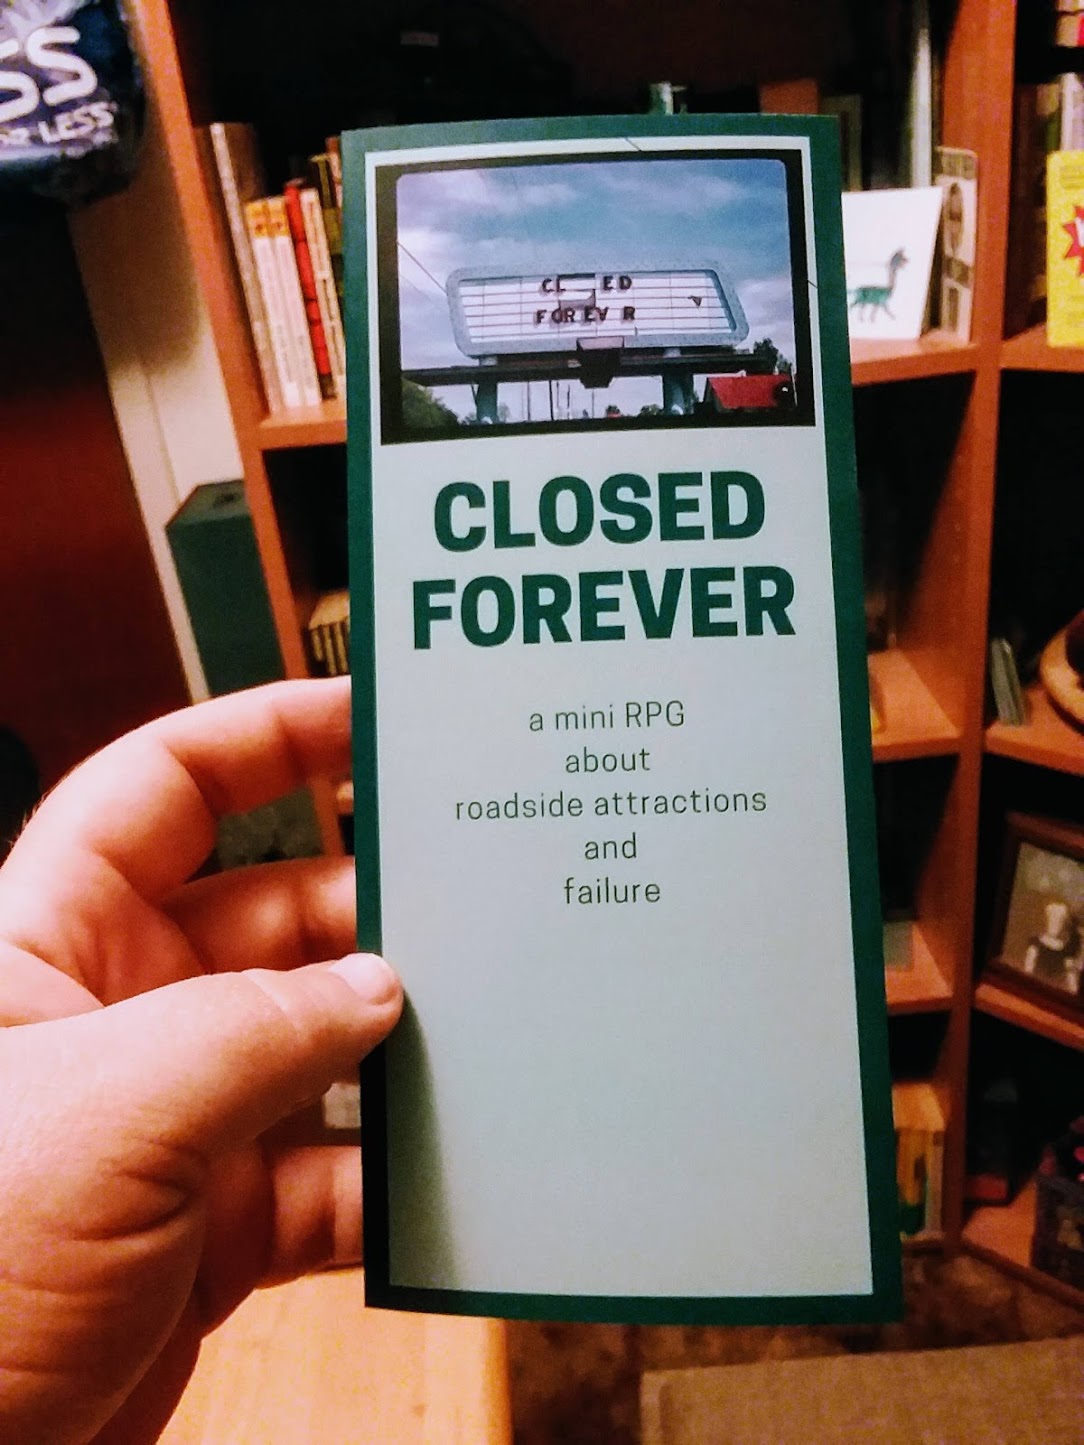 Closed Forever: The Physical Thing